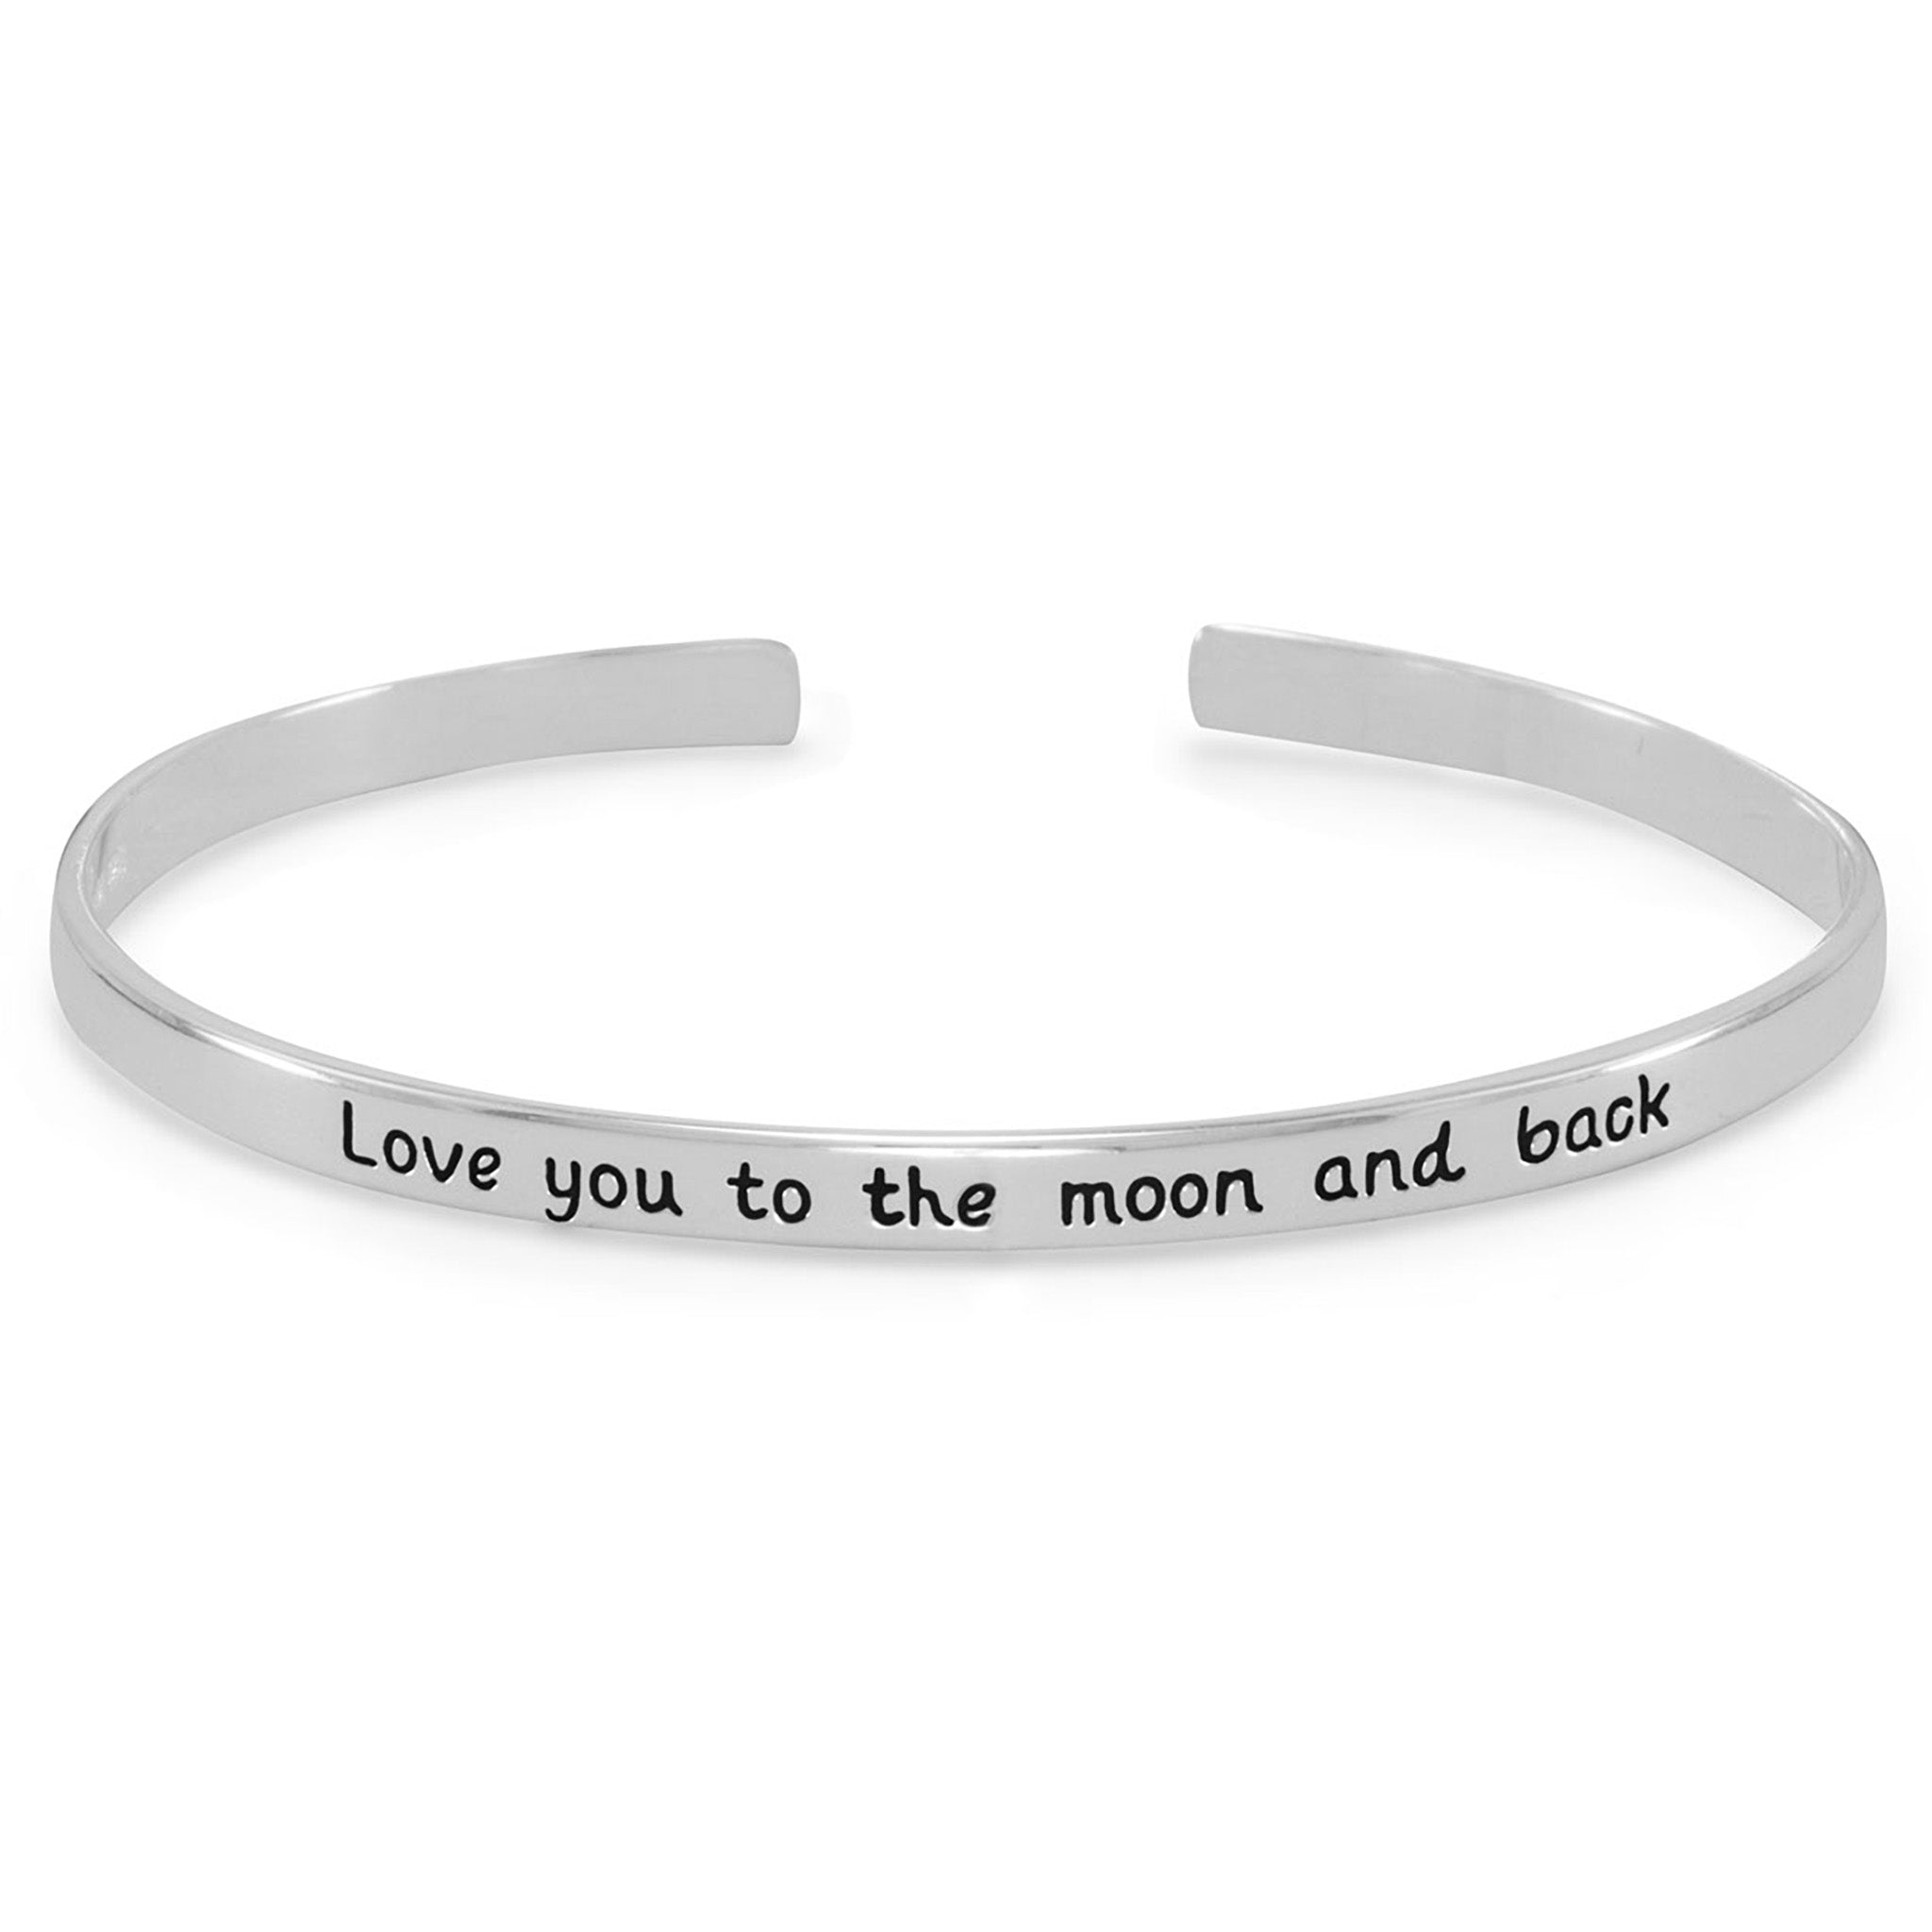 Love You to the Moon and Back Cuff Bracelet